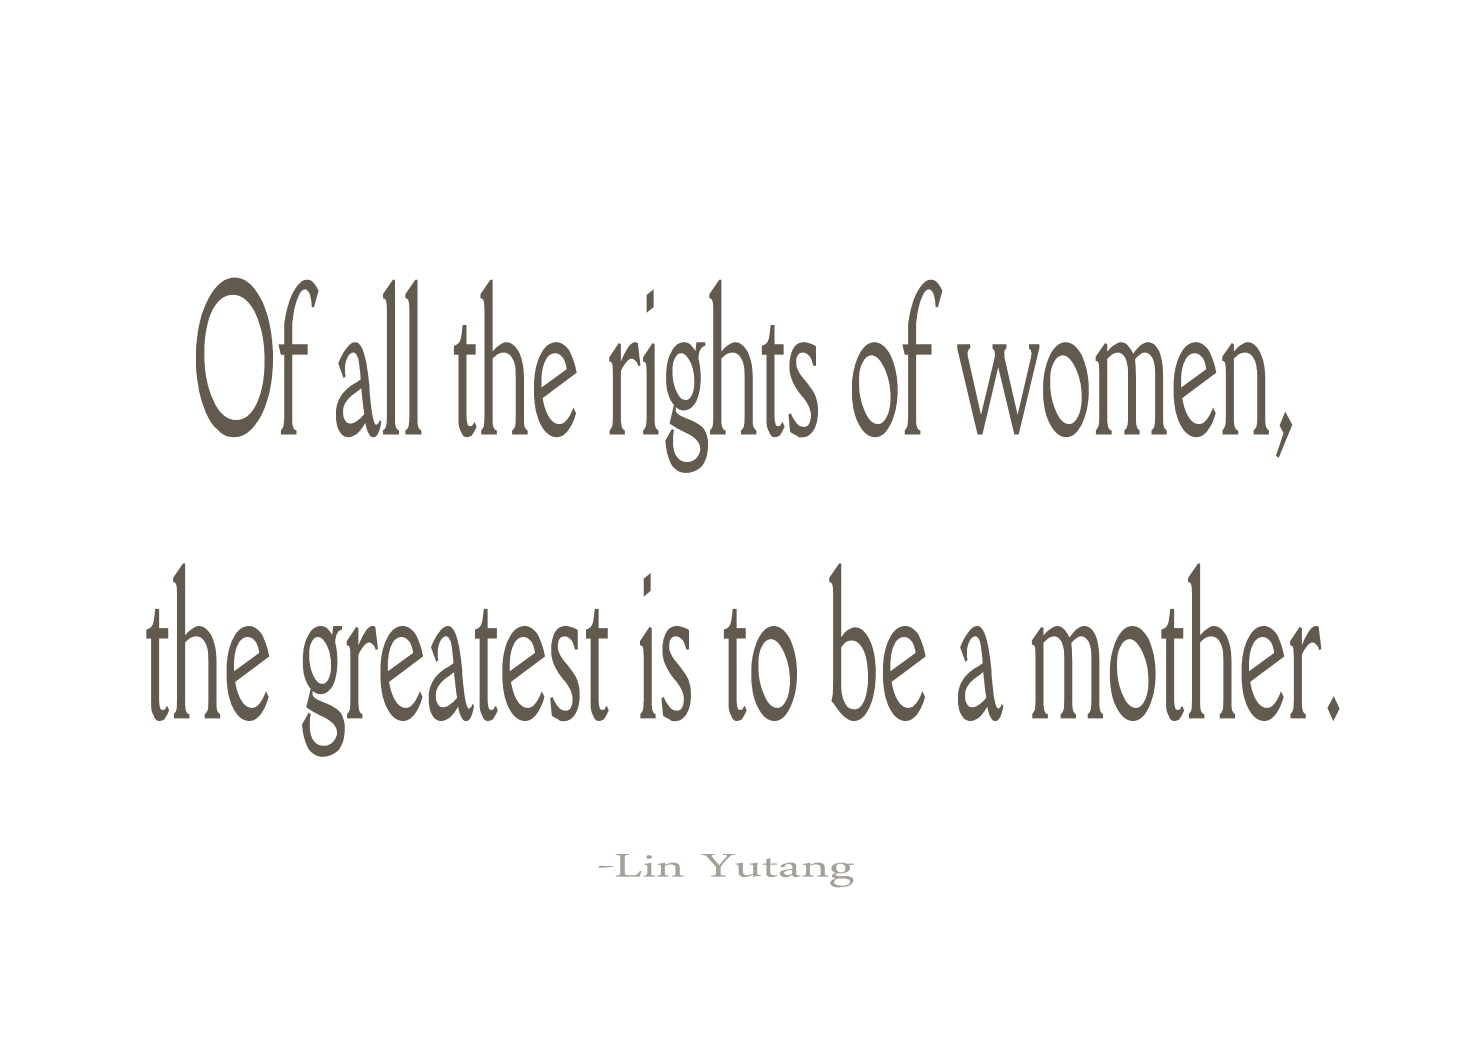 Of all the rights of women, the greatest is to be a mother. Lin Yutang